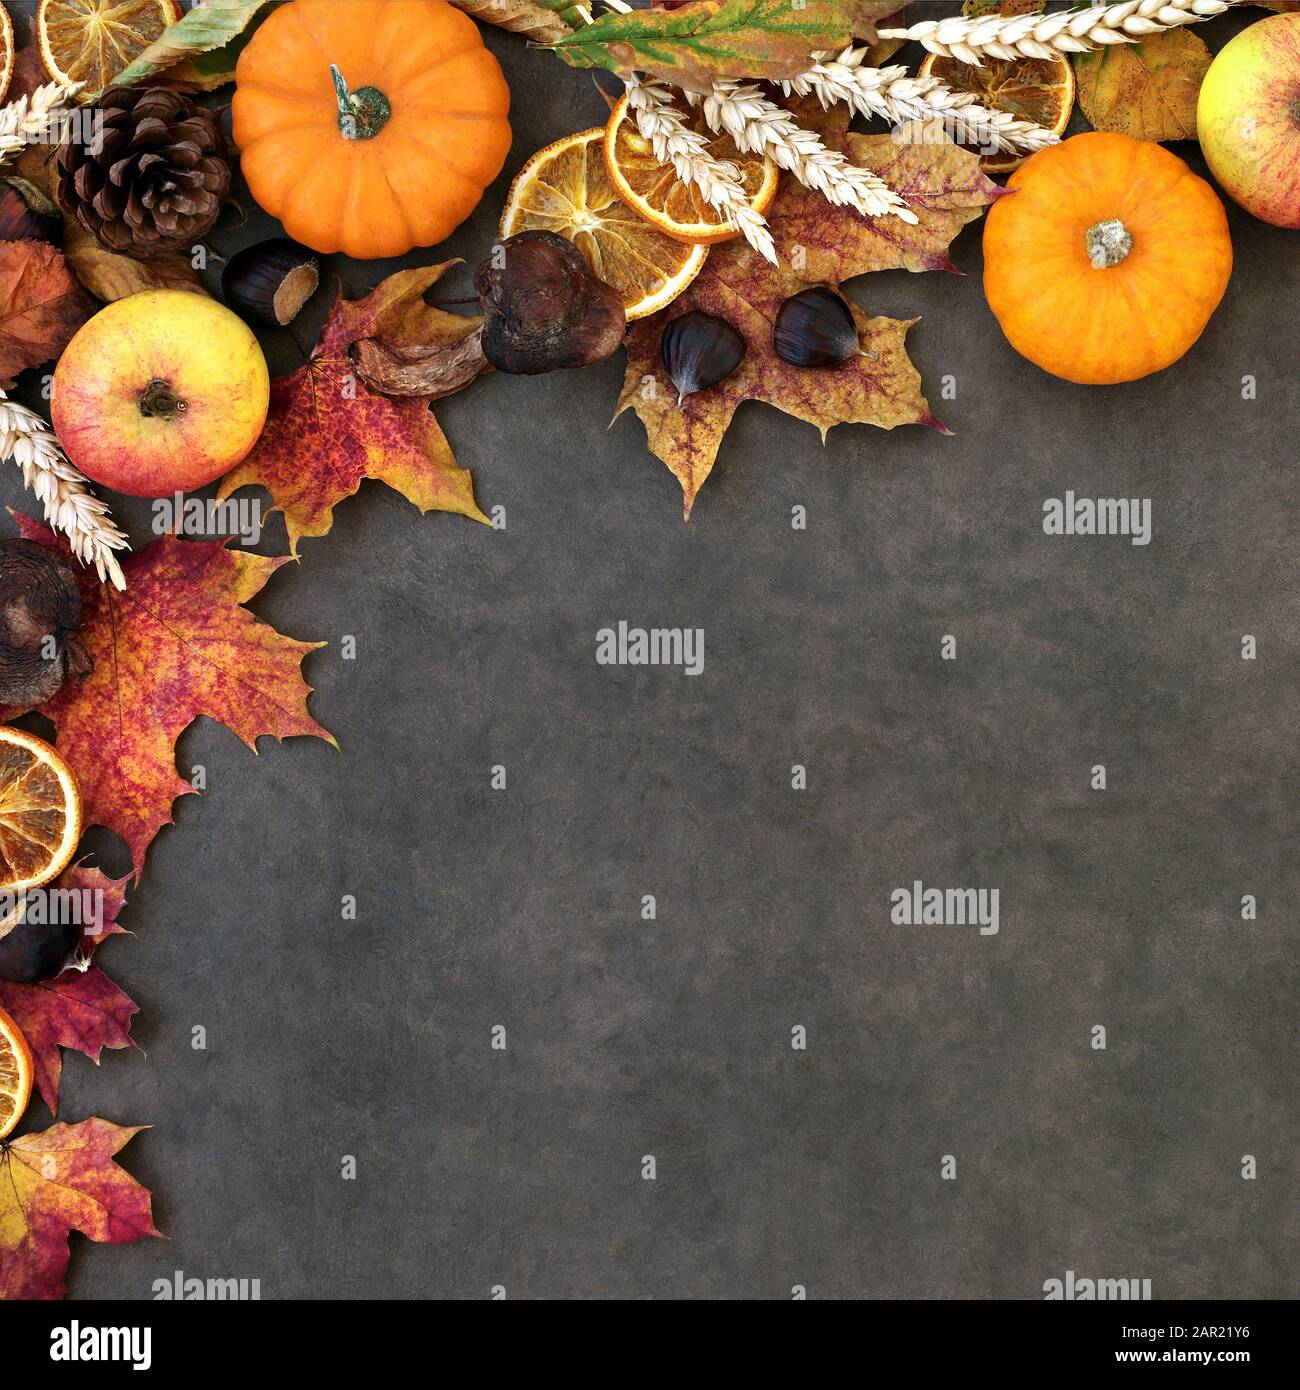 Autumn background border with food, flora and fauna on lokta paper background. Top view. Harvest festival theme. Stock Photo